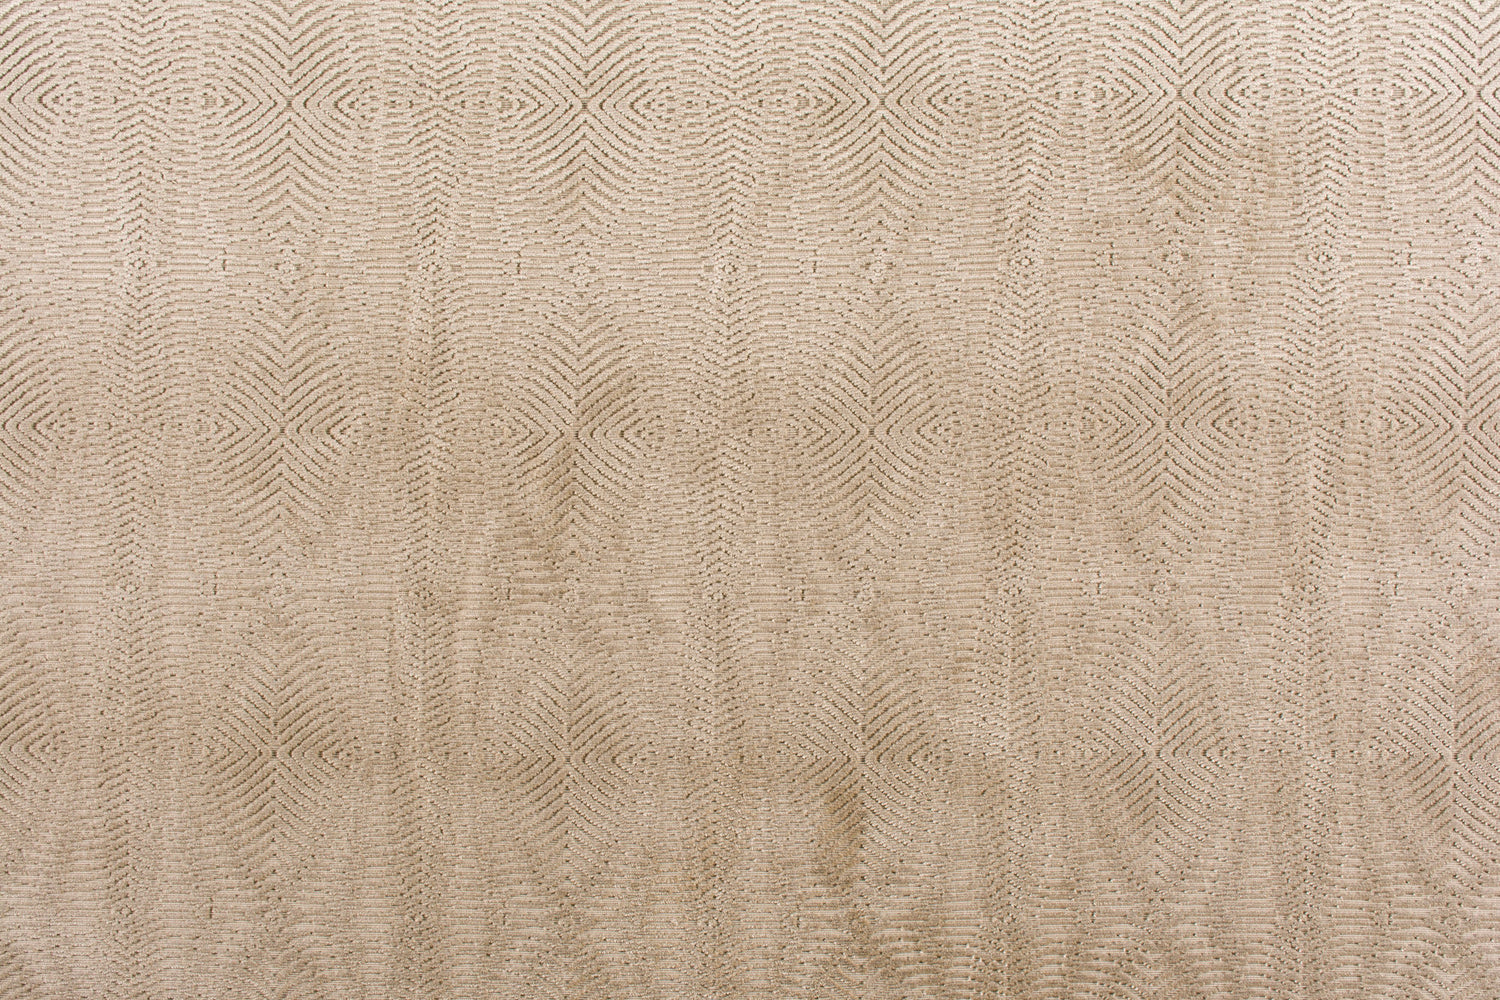 Cava fabric in desert color - pattern number V4 00034020 - by Scalamandre in the Old World Weavers collection